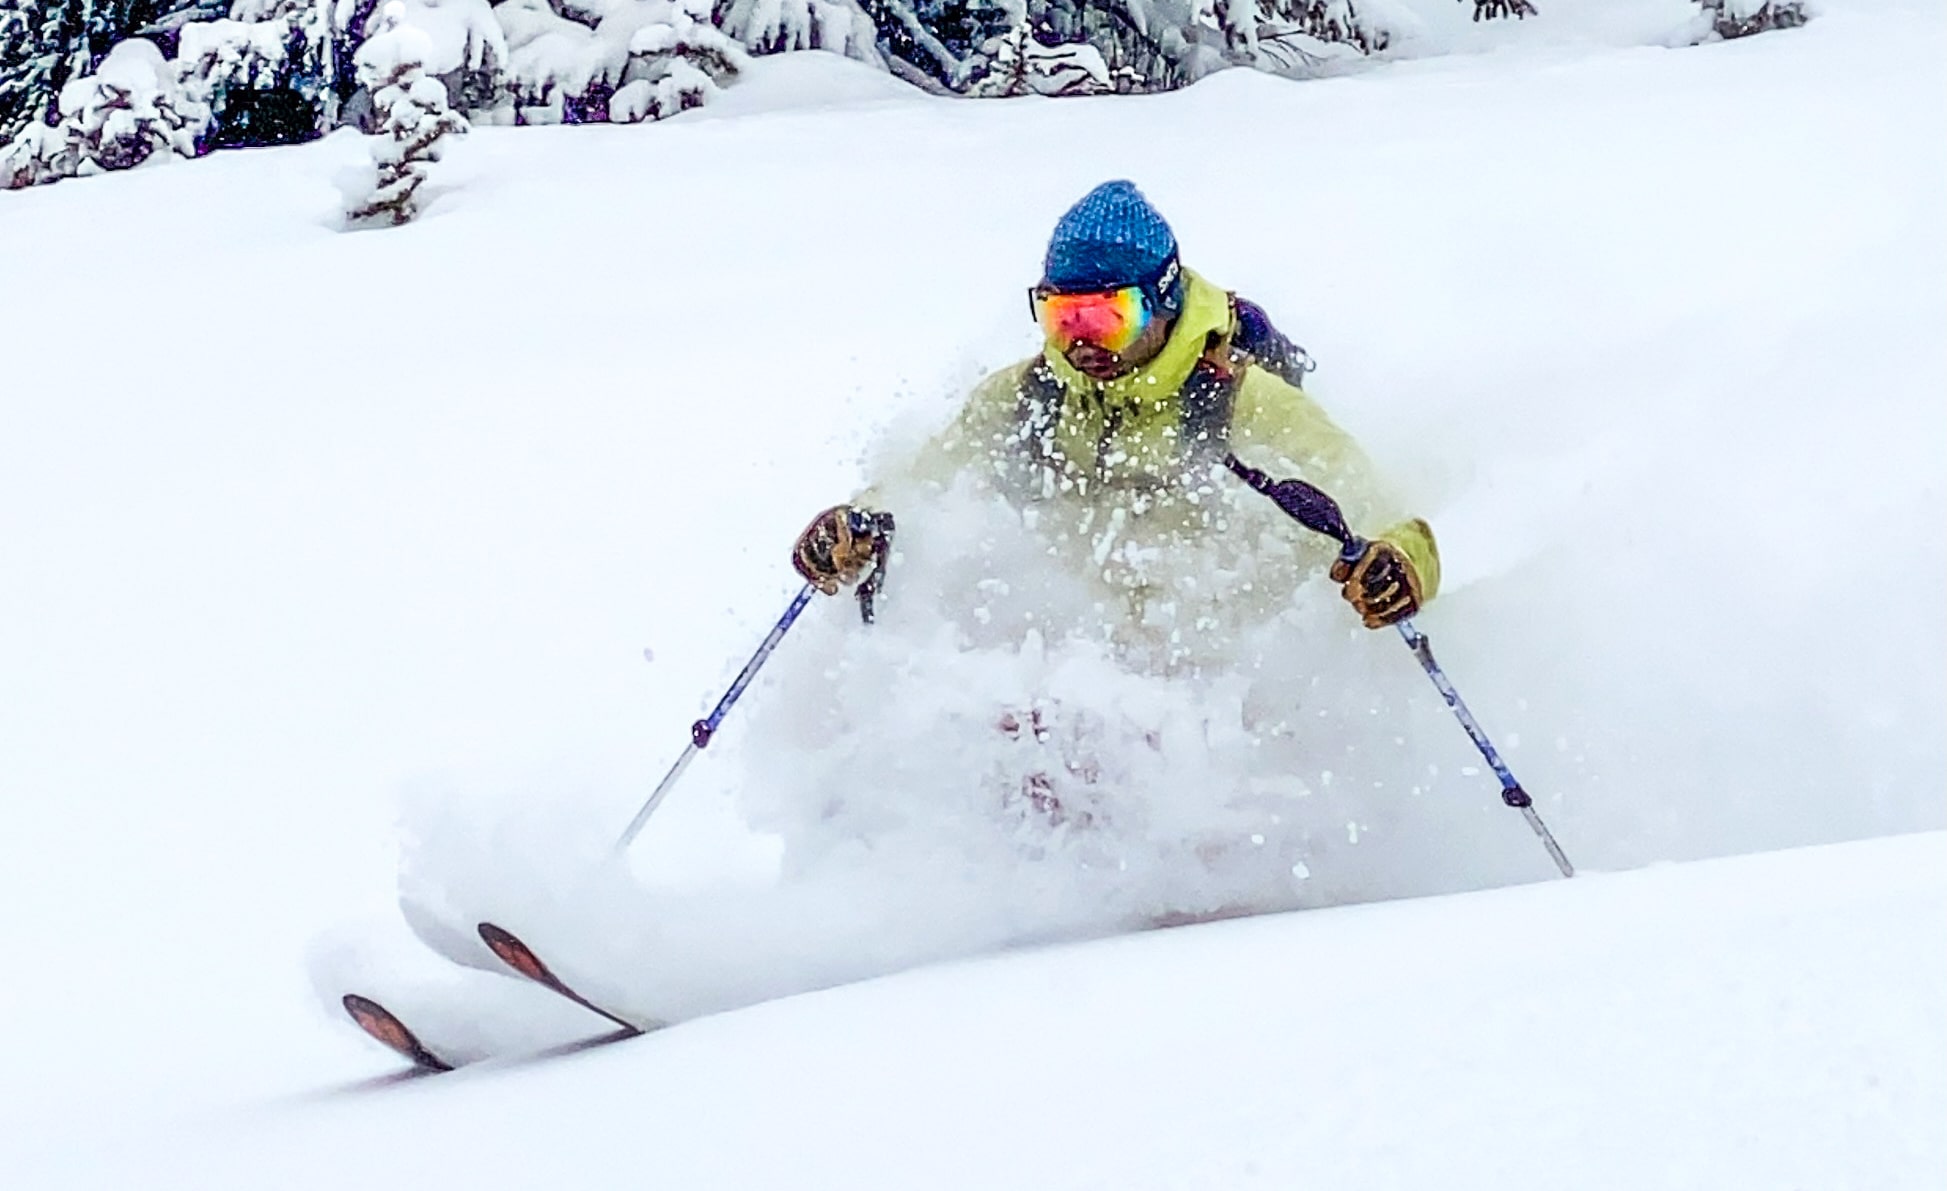 Backcountry skiing in Vail